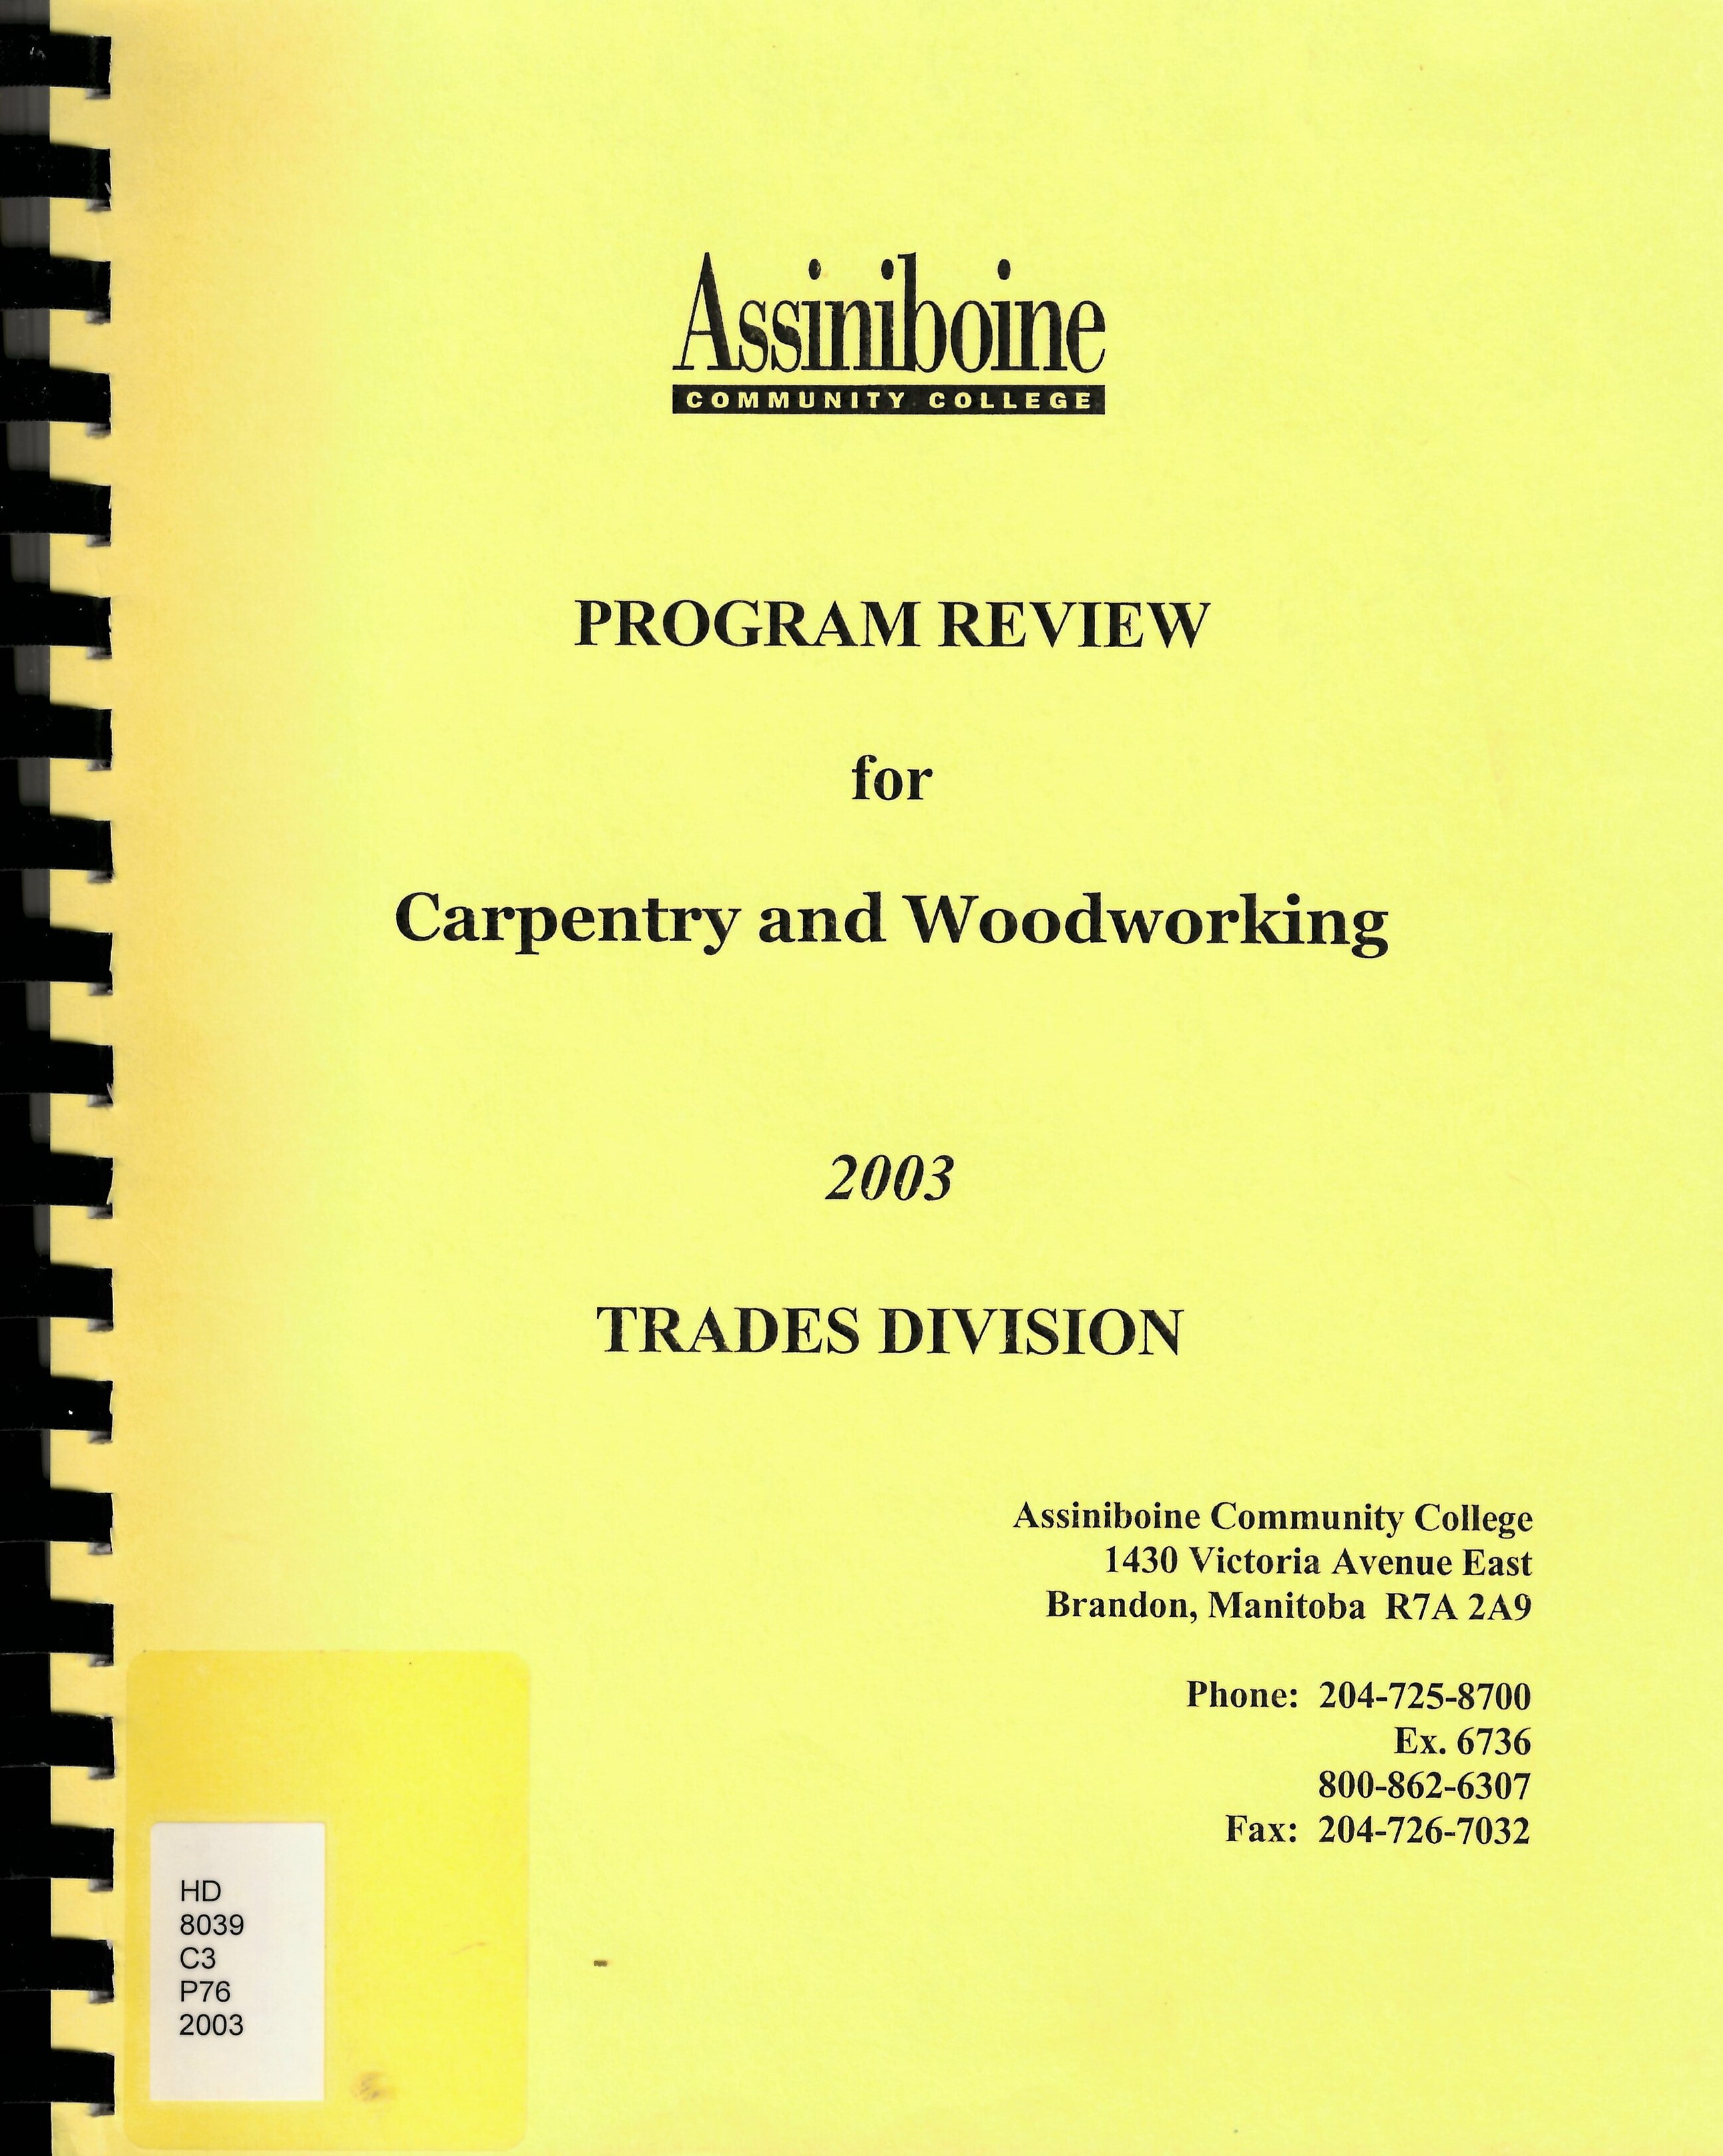 Program review for carpentry and woodworking